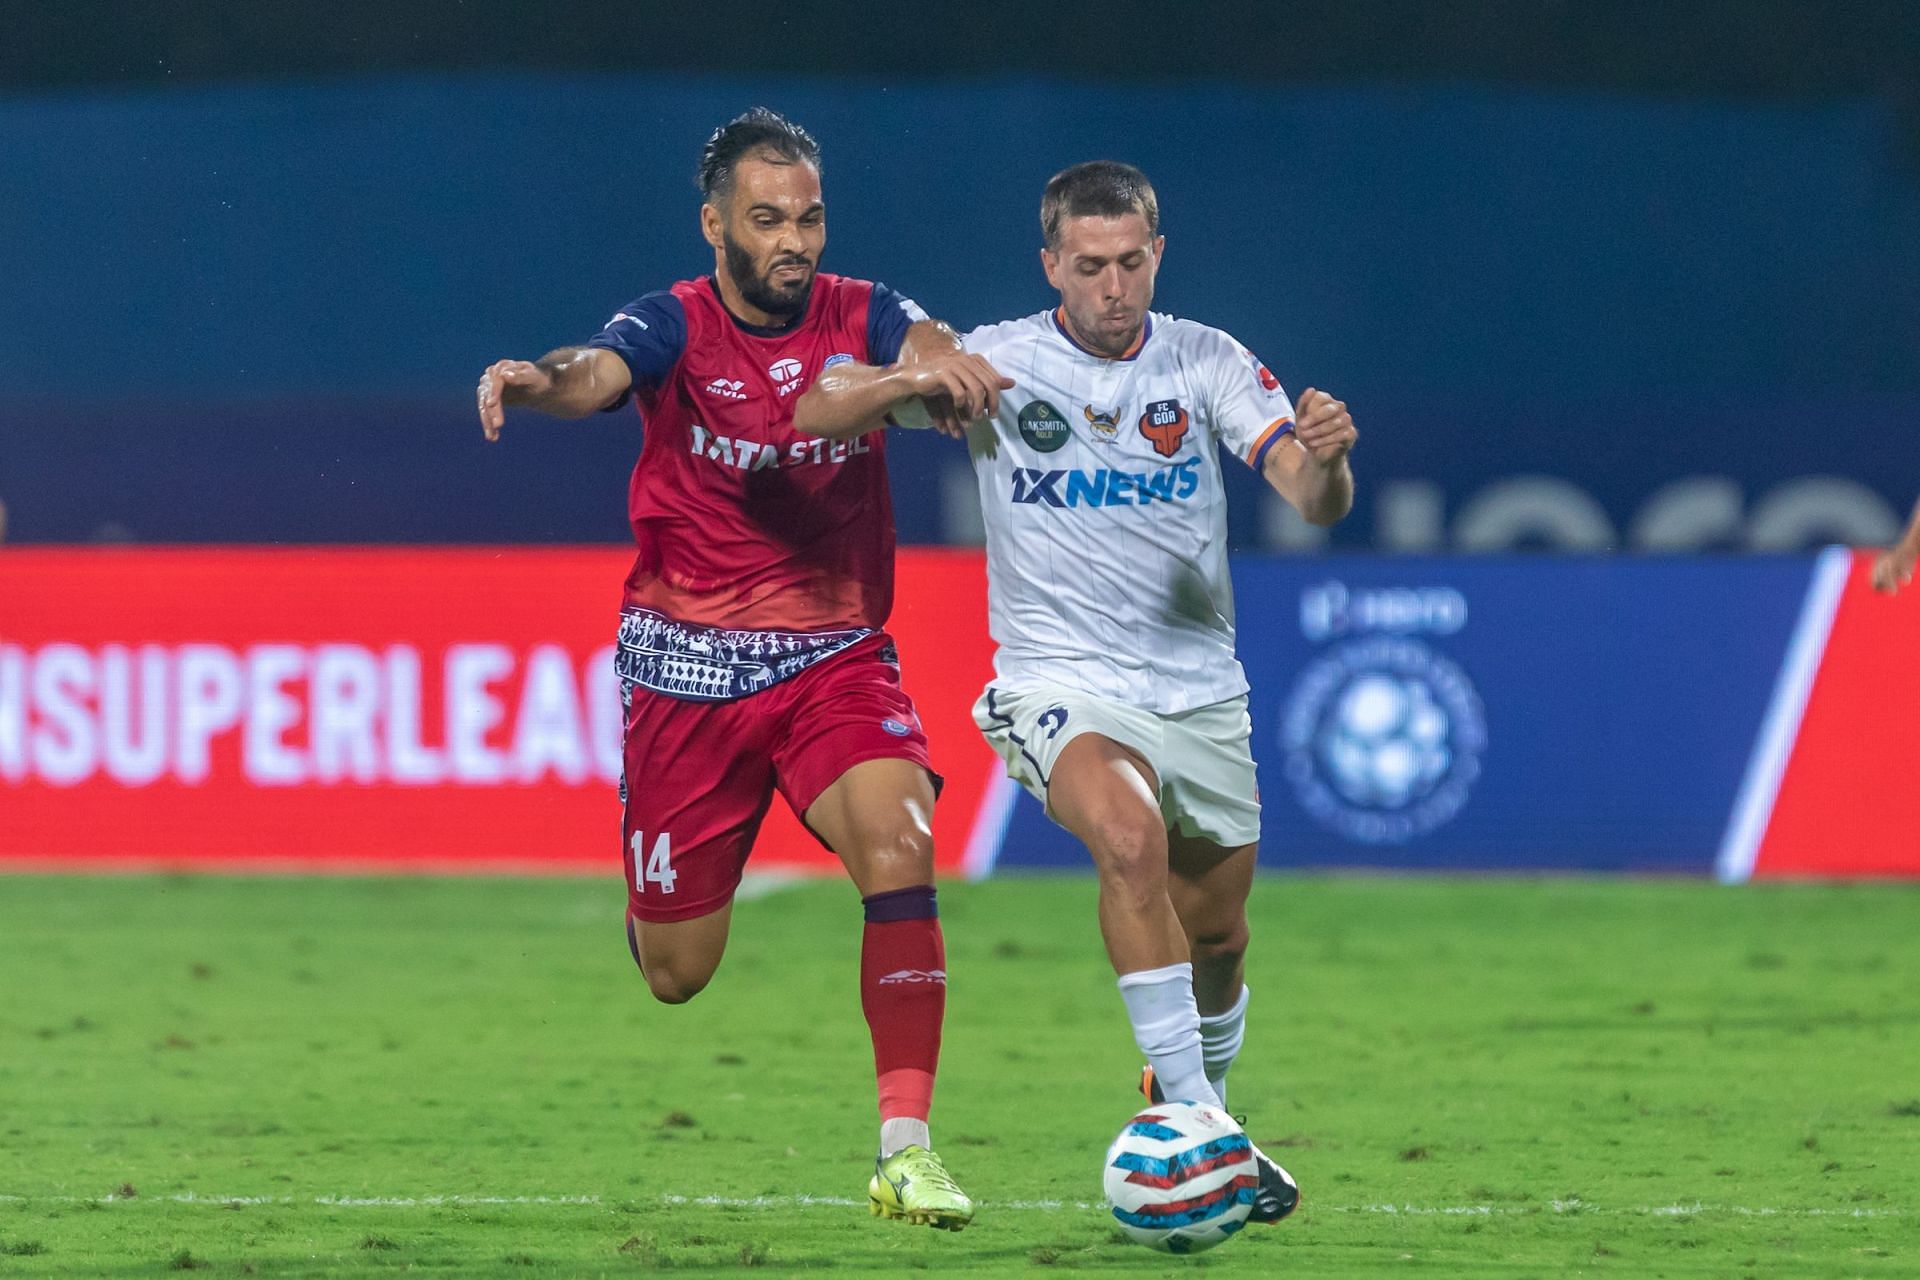 Jamshedpur FC&#039;s Alexandre Lima and FC Goa&#039;s Alberto Noguera vie for the ball (Image Courtesy: ISL)